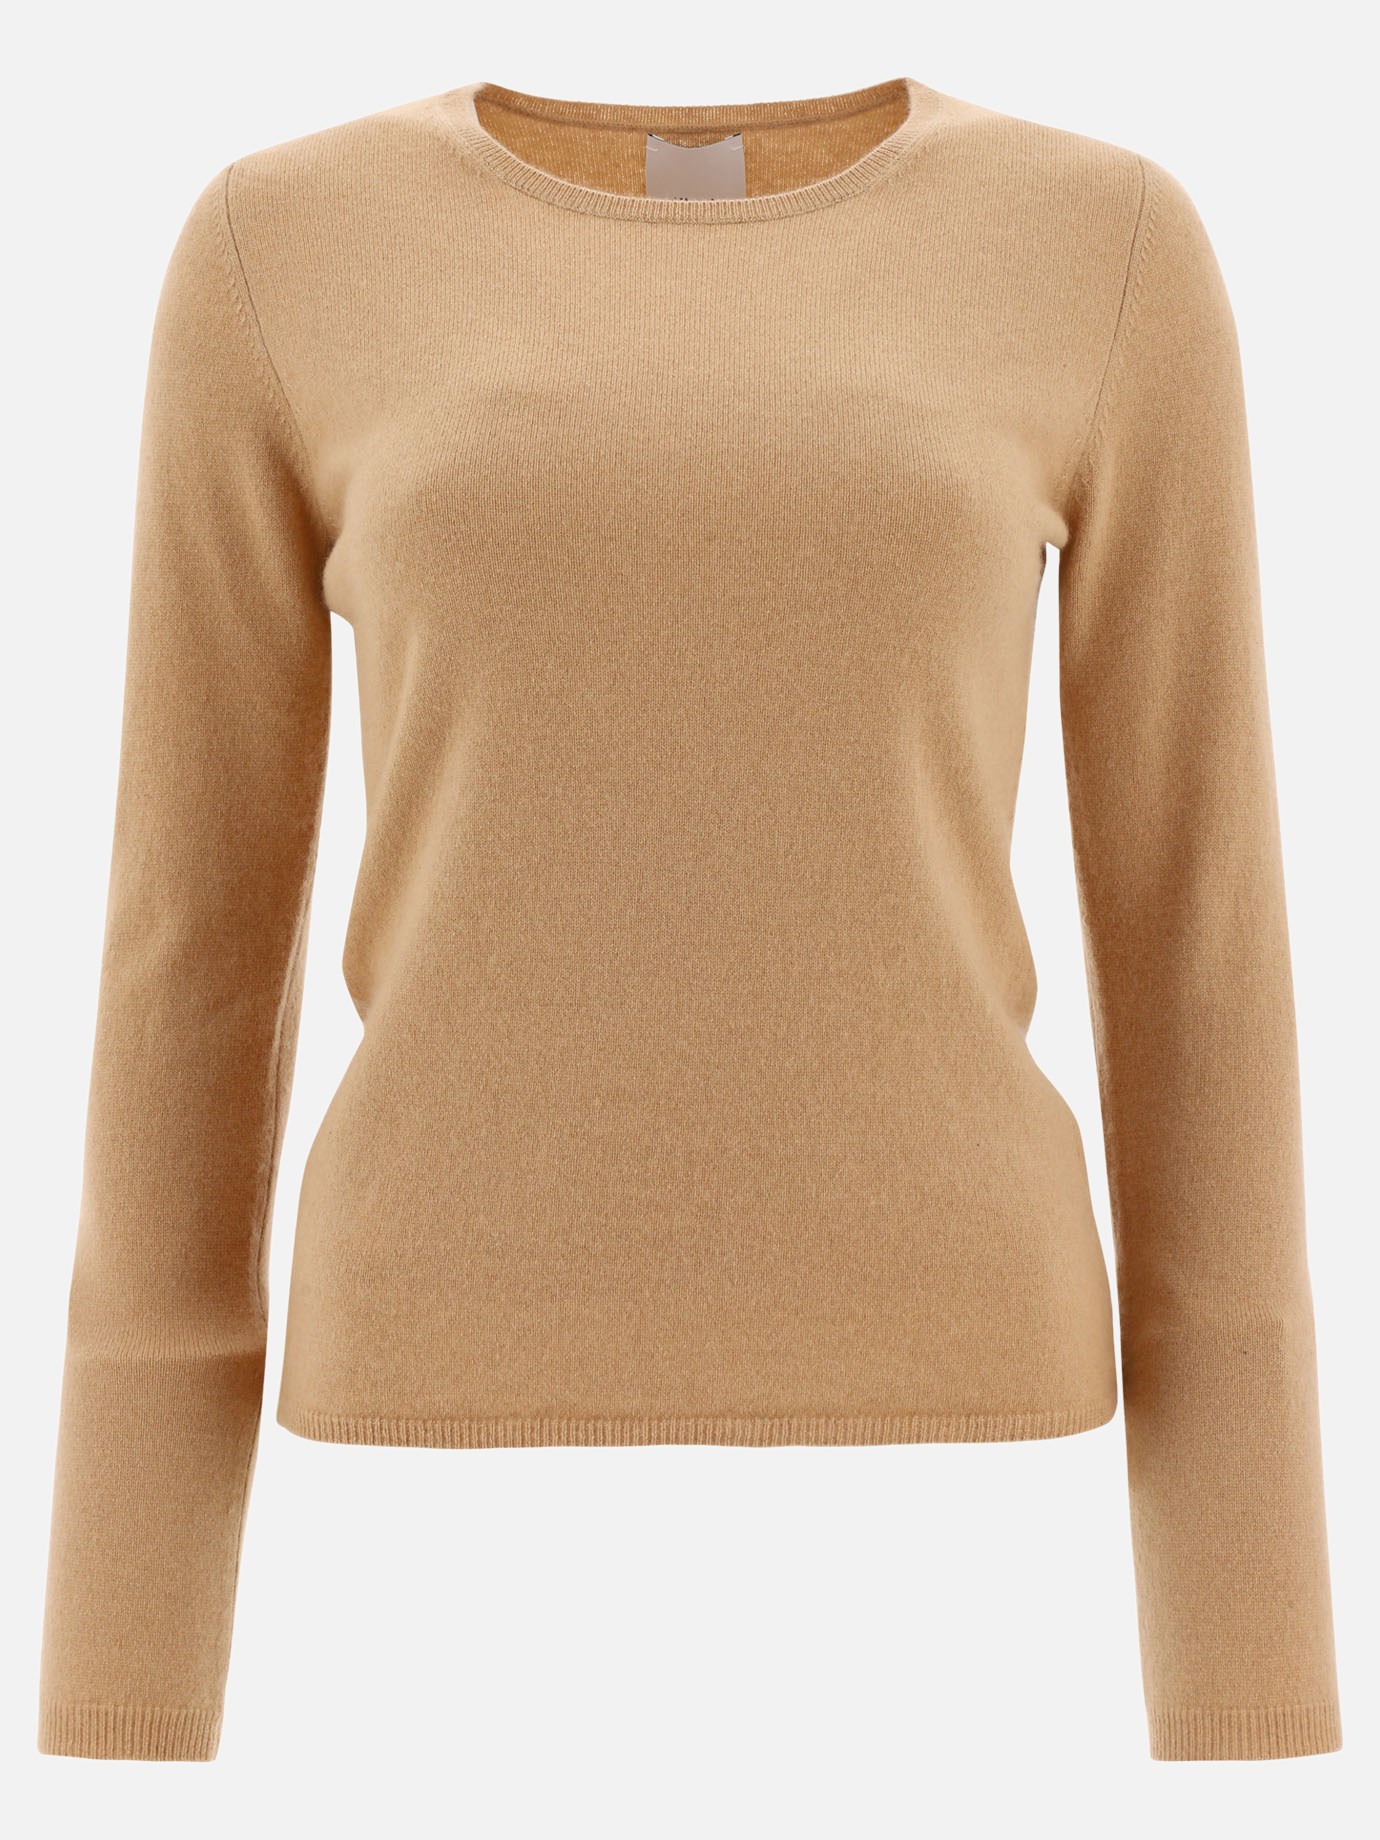  RD  sweaterby Allude - 5